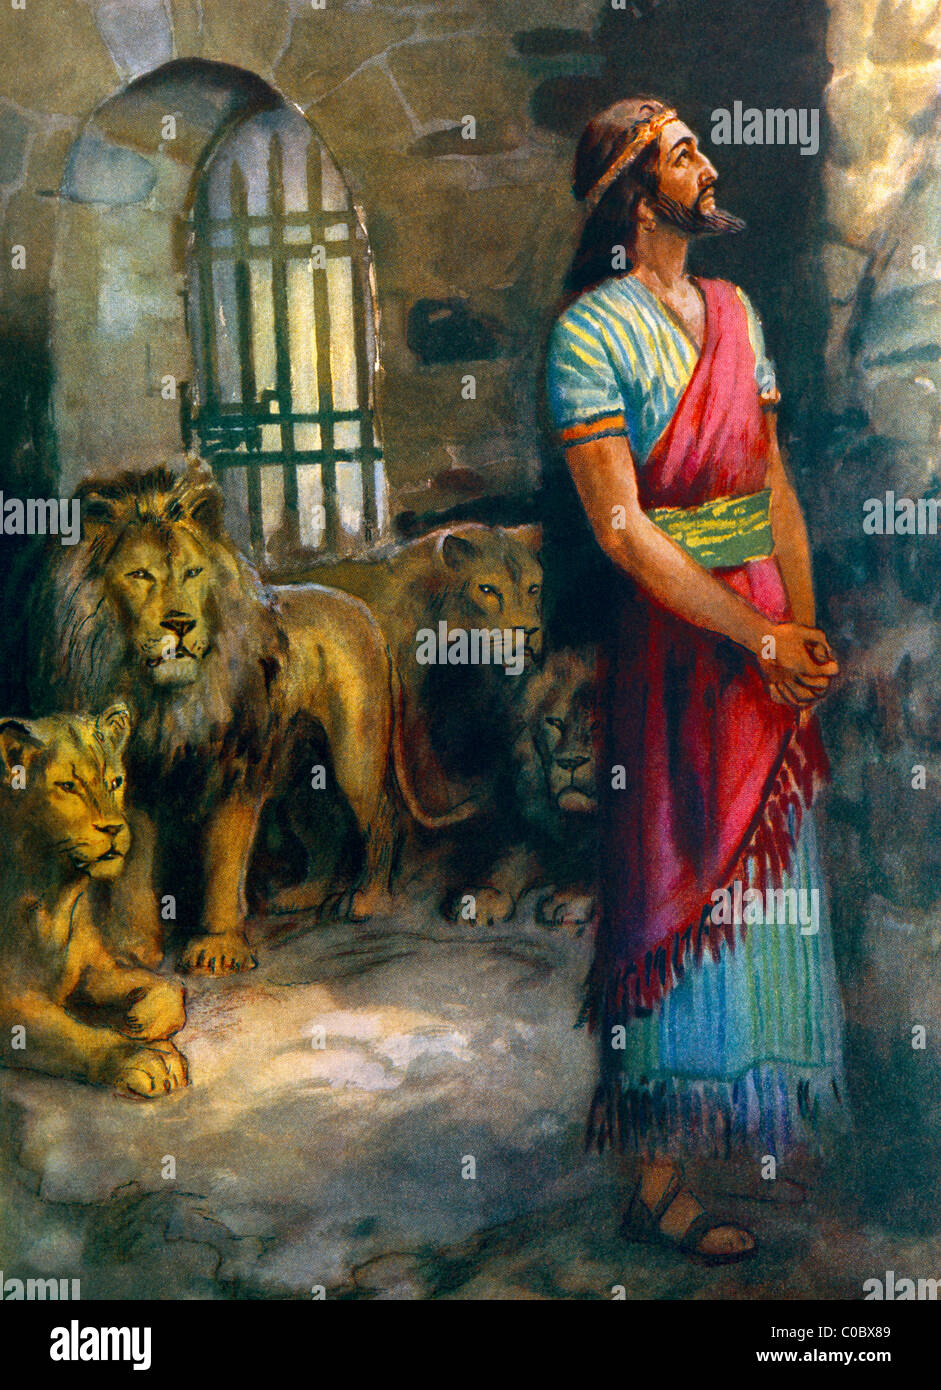 Cast Into The Lions Den Daniel Is Unhurt Painting By Henry Coller Bible Story Stock Photo